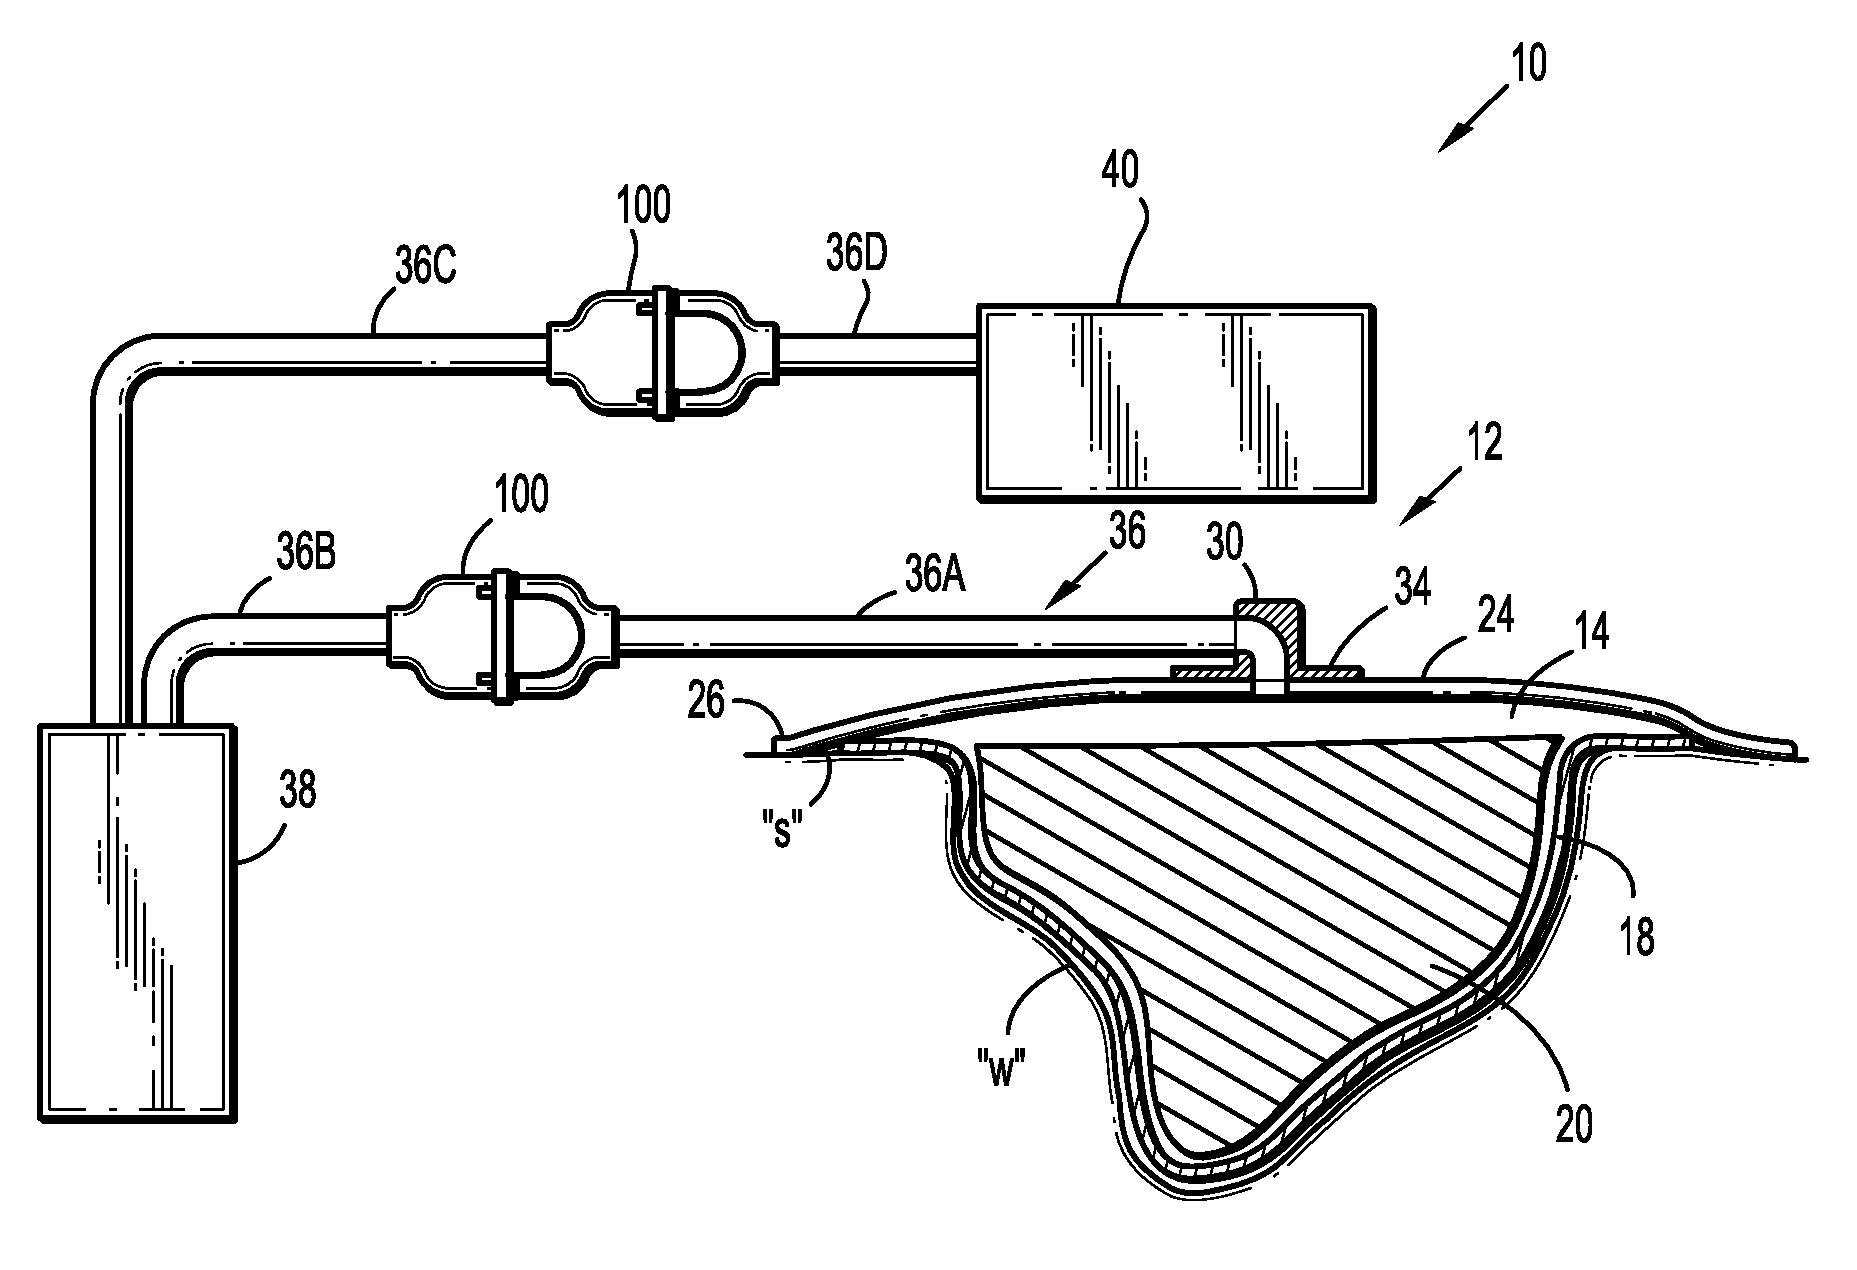 System for providing continual drainage in negative pressure wound therapy